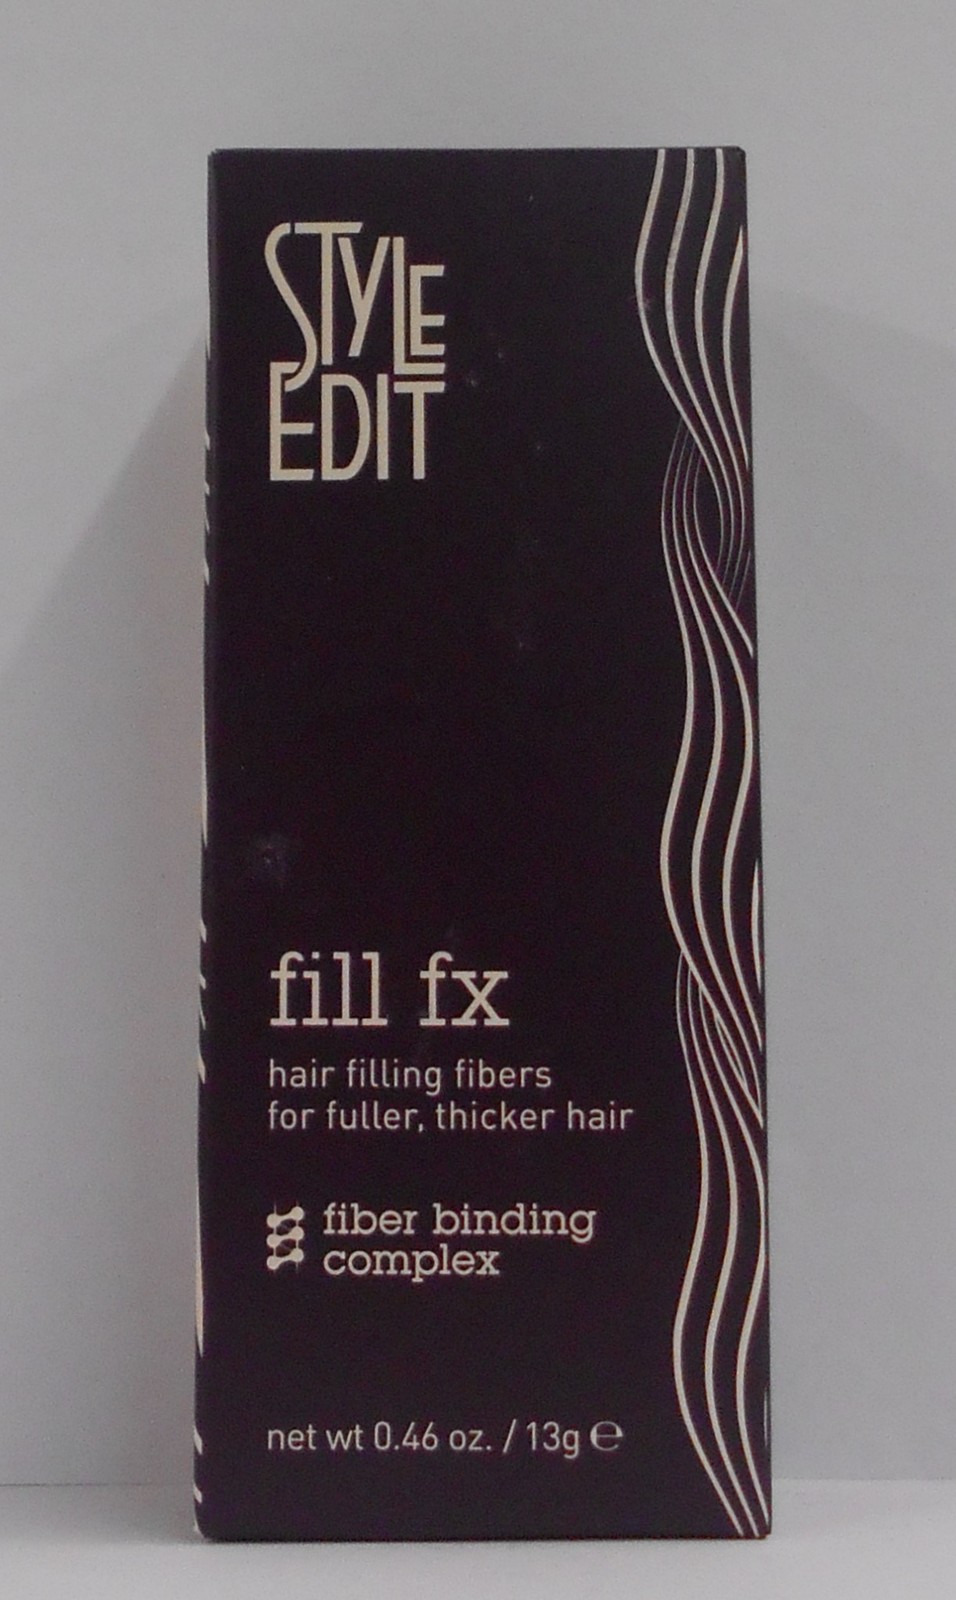 Primary image for STYLE EDIT FILL FX Fiber Binding Complex Hair Filling Fibers ~ .46 oz/ 13 g